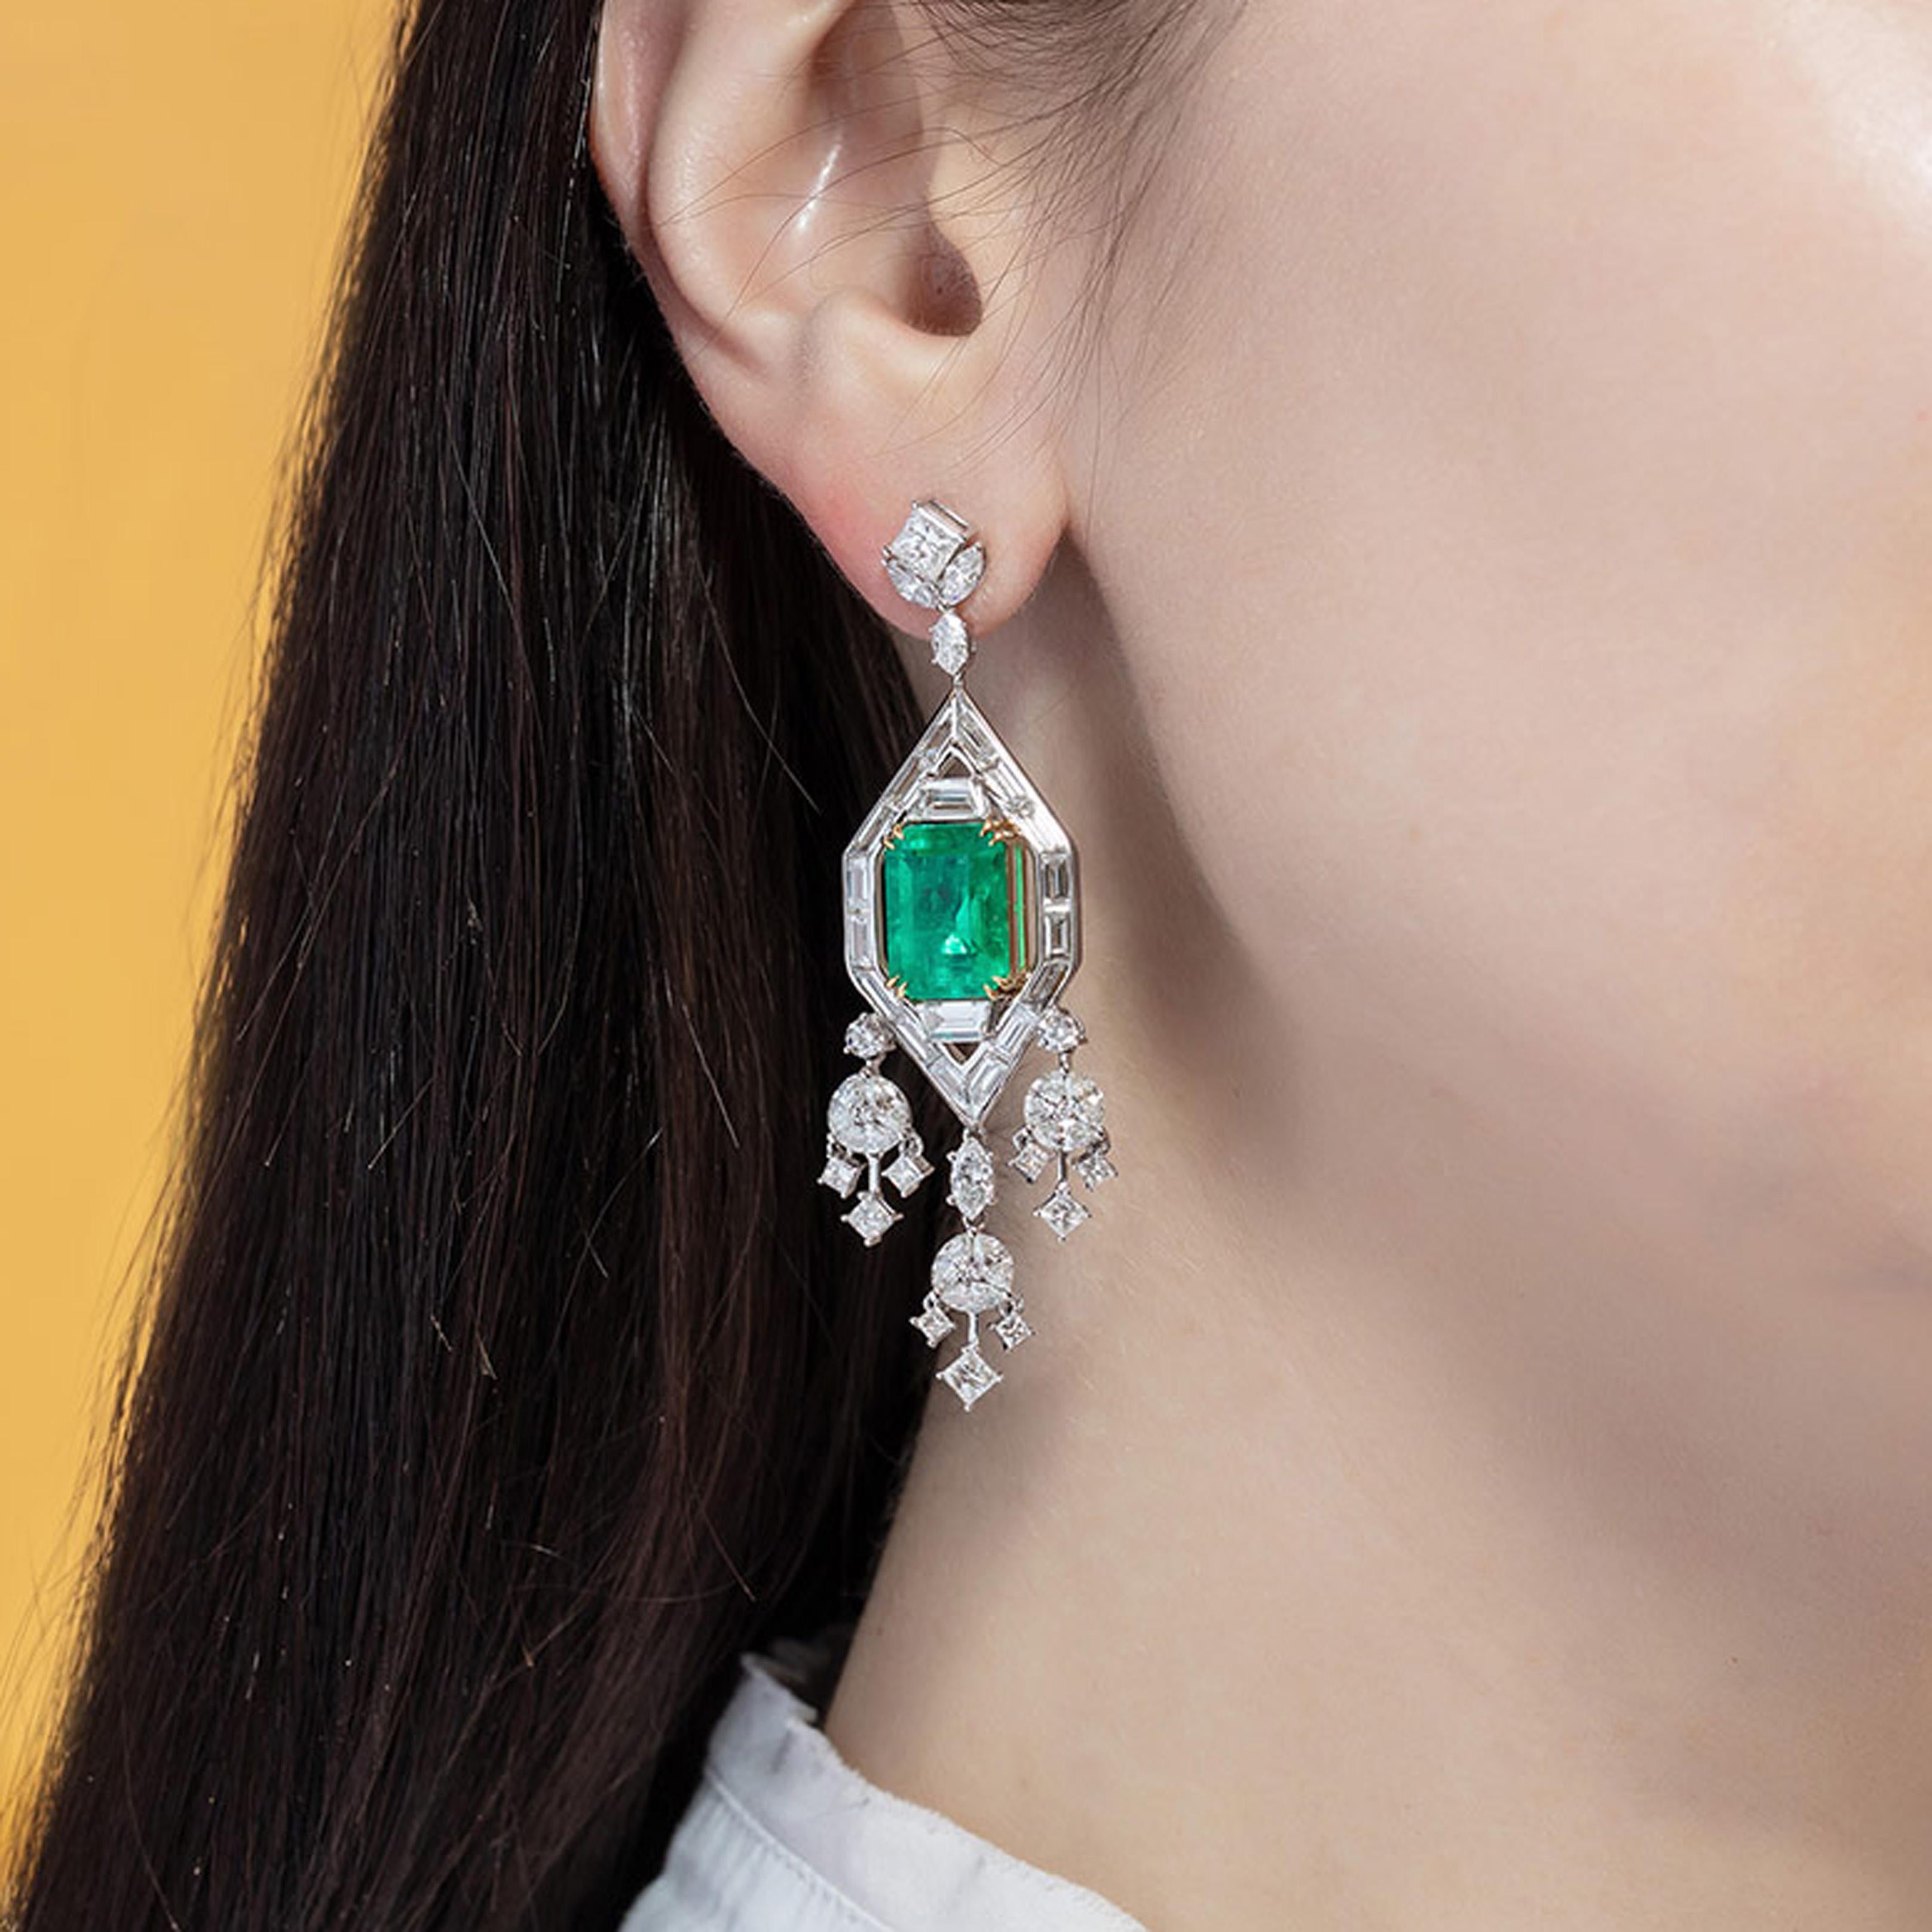 Our timeless ‘Tanisa’ earrings uniquely integrates a geometric Art Deco frame with playful tassels from the Mughal era… The unique art deco geometry of this layout creates a structured frame that gives attention on each enchanting emerald. The